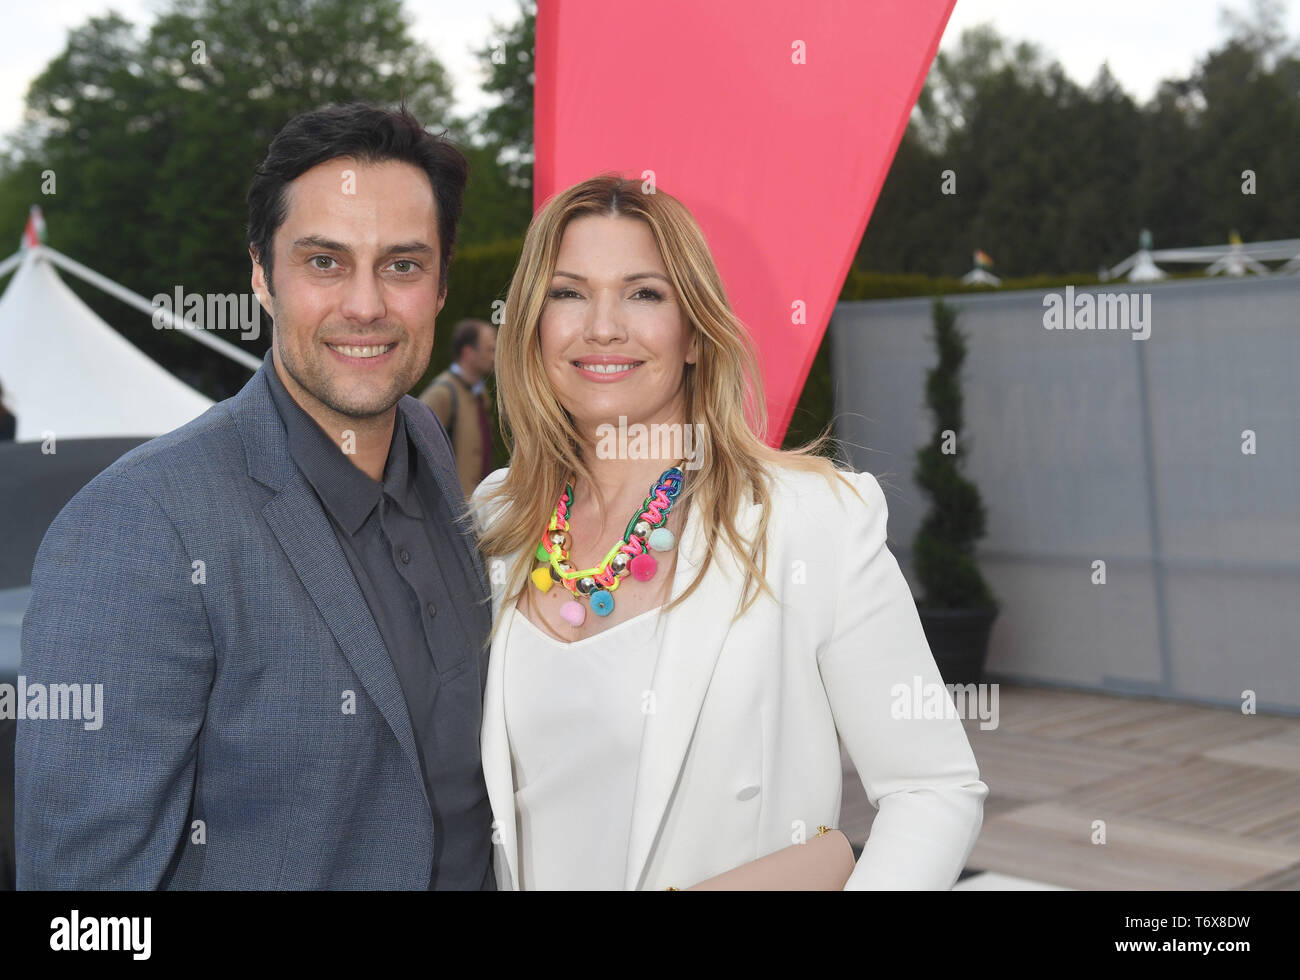 Munich, Germany. 02nd May, 2019. Sports presenter Jessica Kastrop and her husband Roman Libbertz come to the event 'Service at BILD', which takes place as part of the ATP tournament, the BMW Open, at MTTC Iphitos. Credit: Felix Hörhager/dpa/Alamy Live News Stock Photo